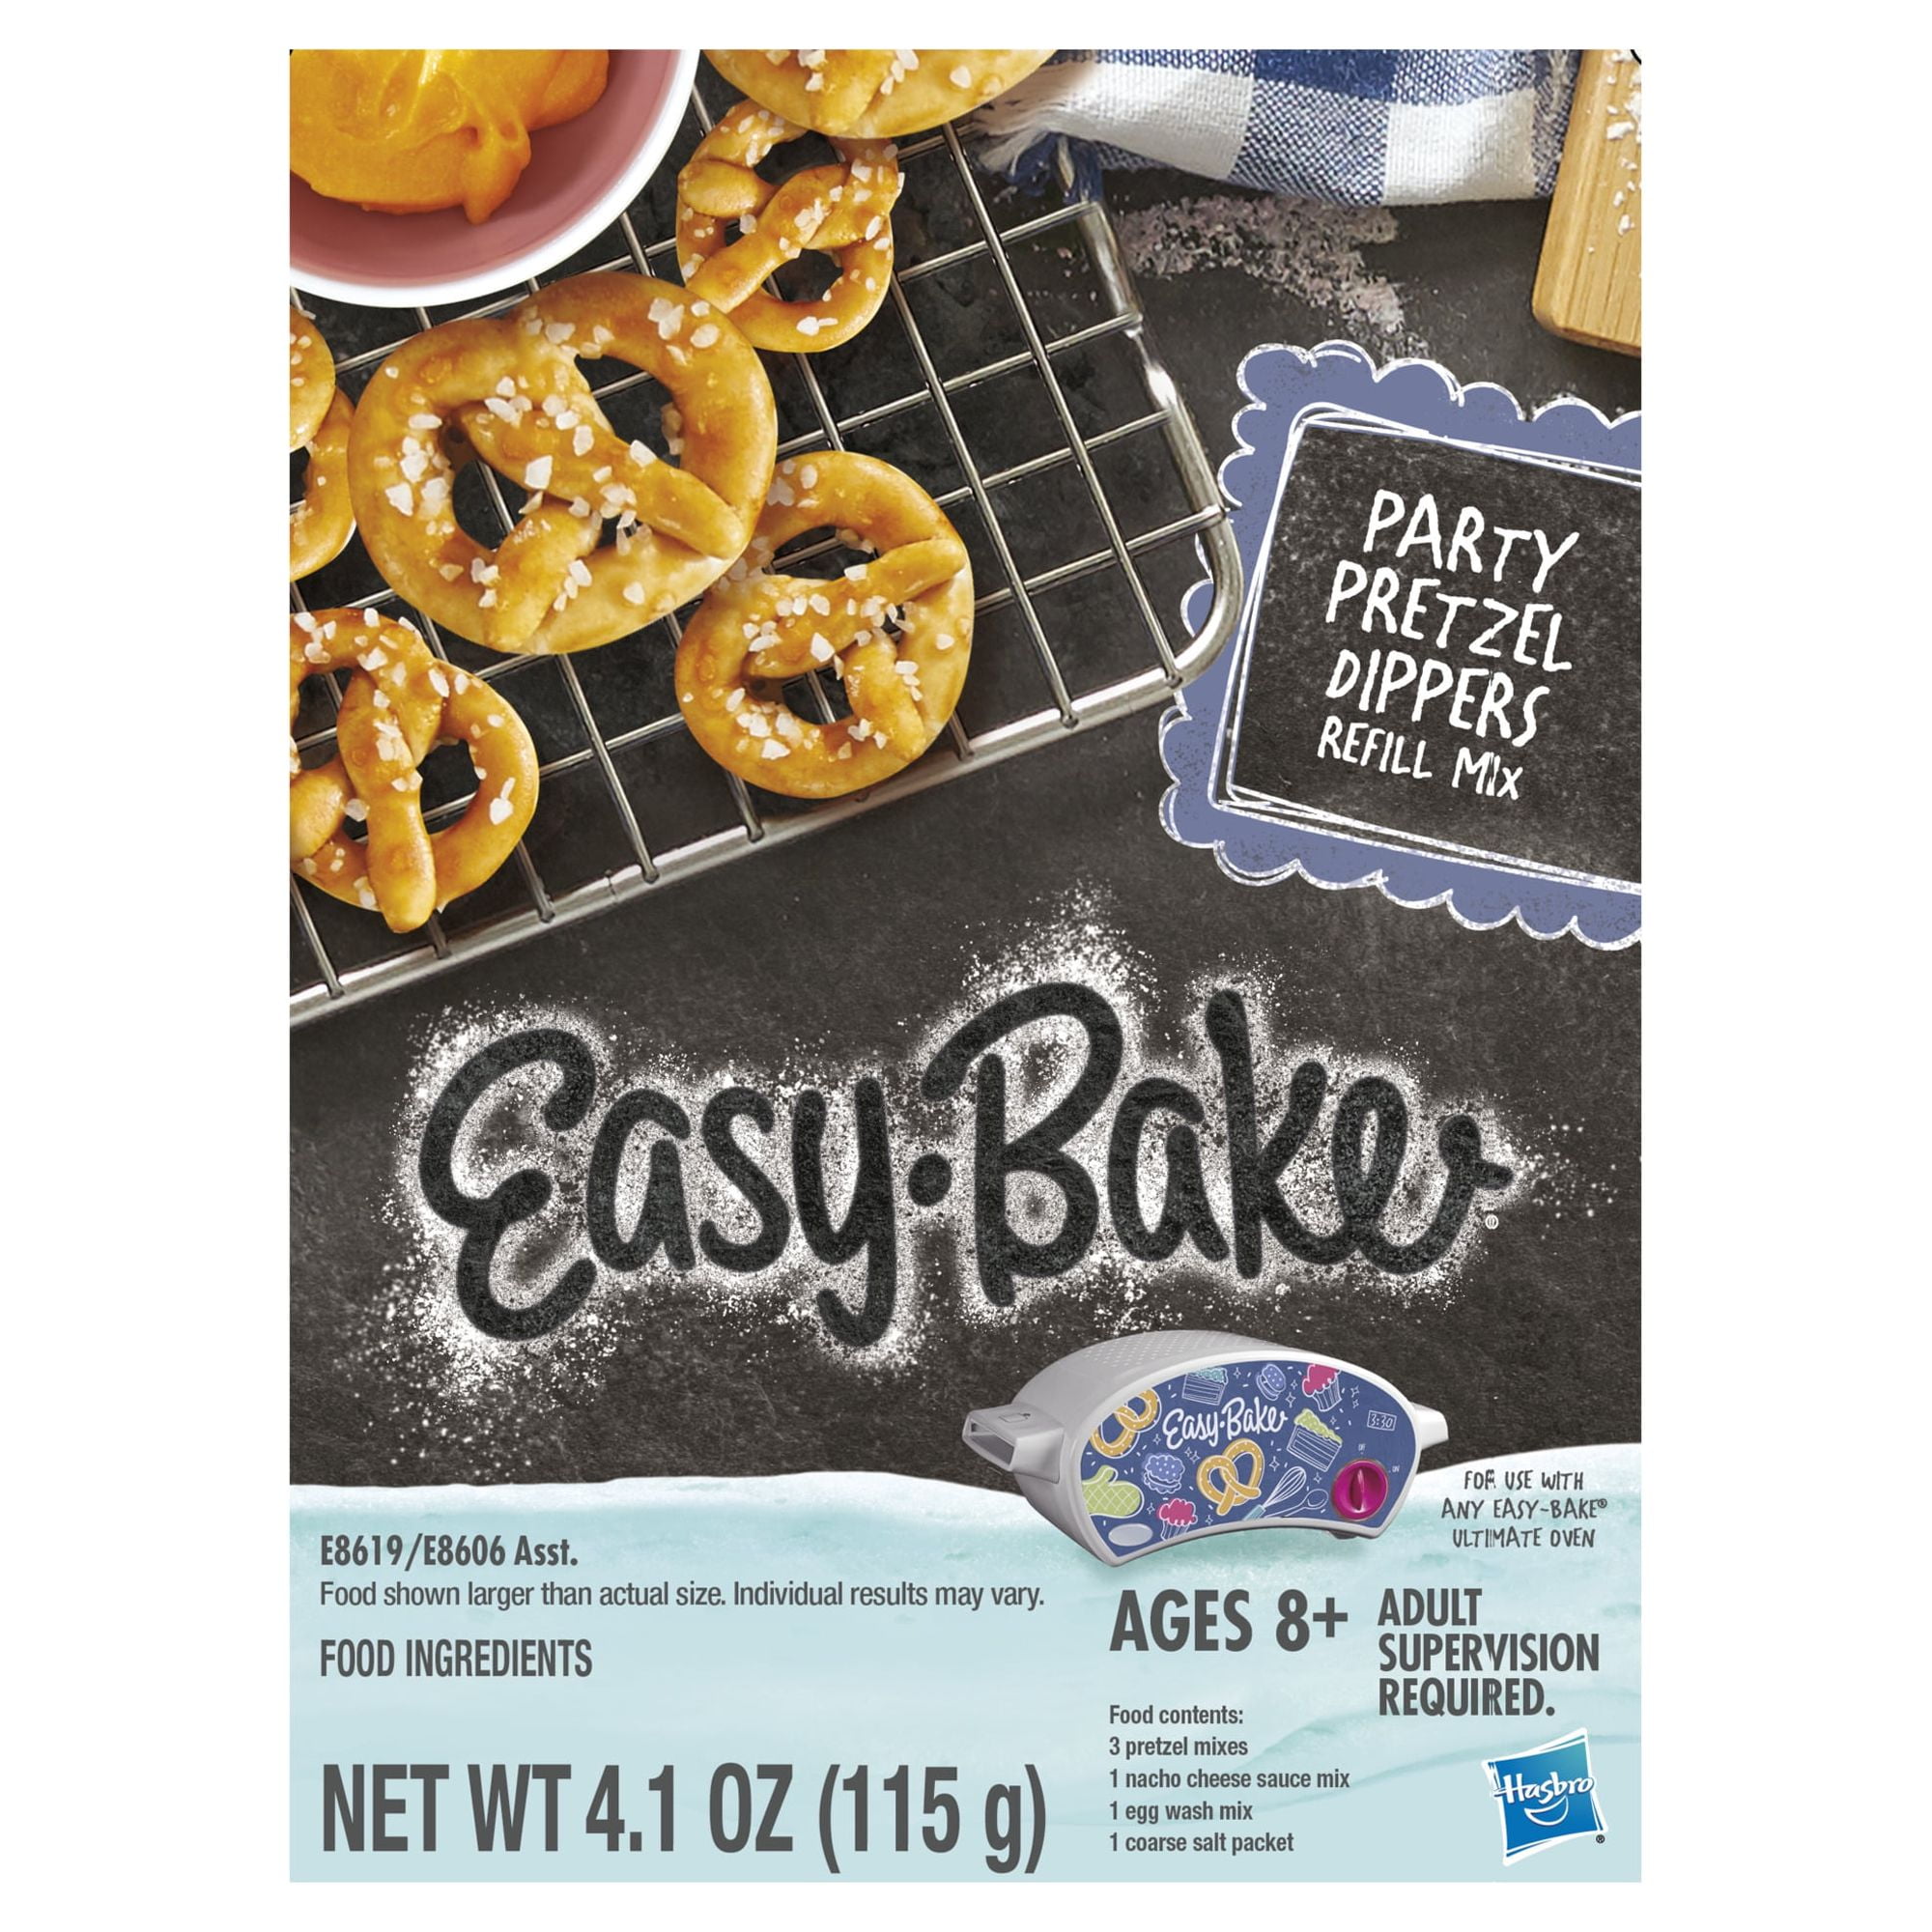 Easy Bake Oven Pans by Quadrapoint for sale online